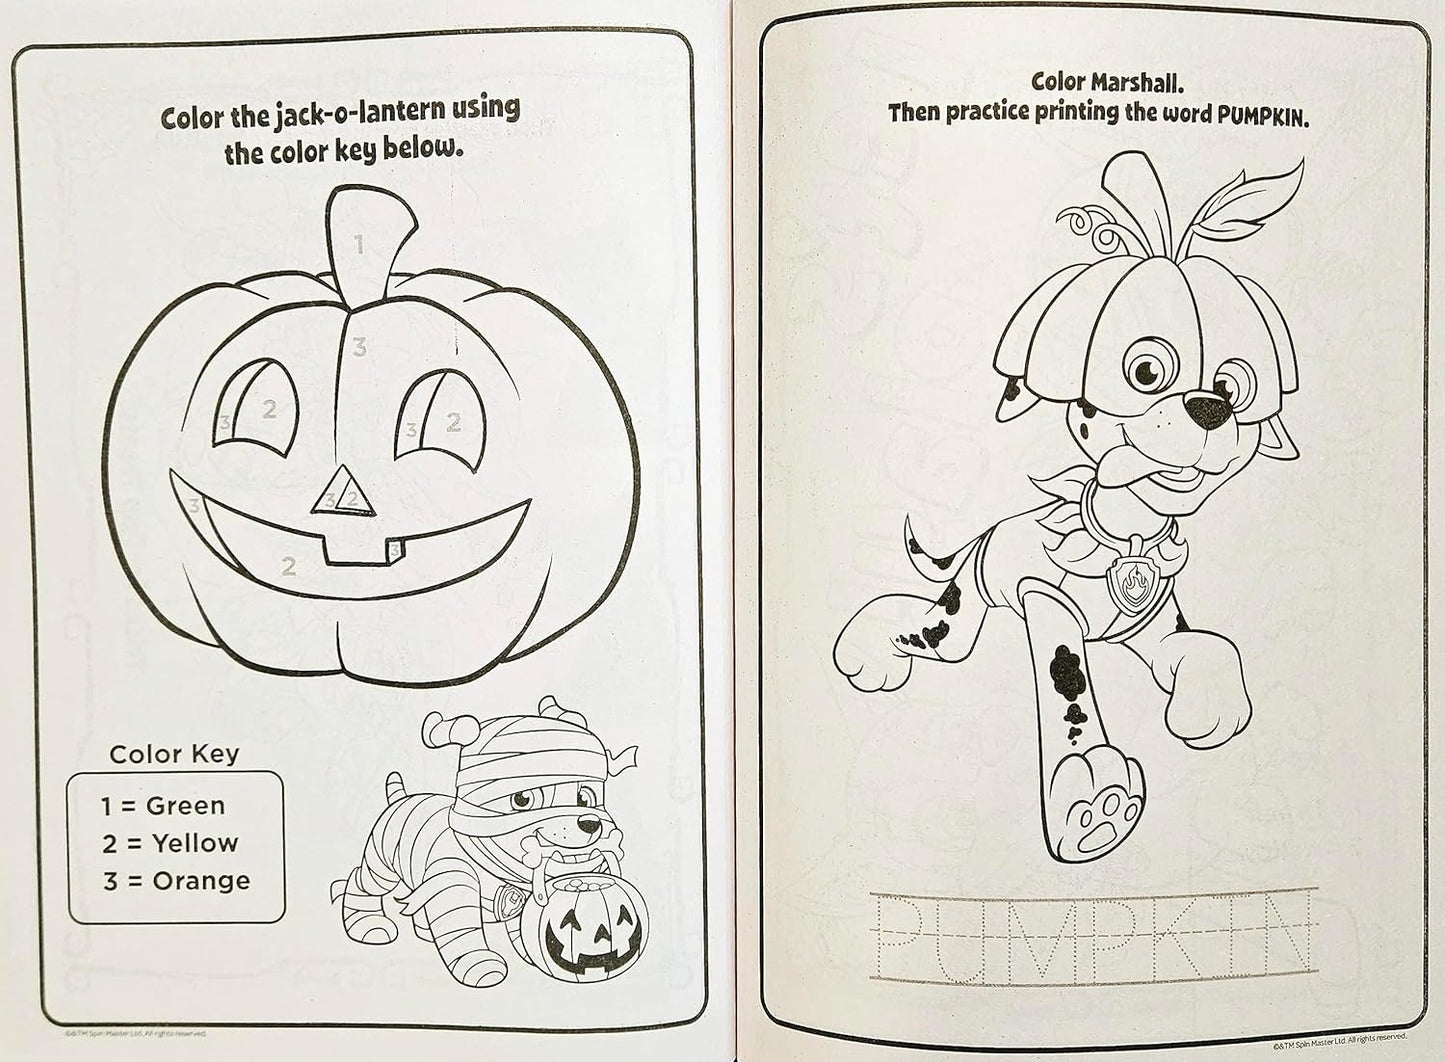 Halloween Coloring & Activity Book Set of 2 - Chase, Rubble, Skye Patrol